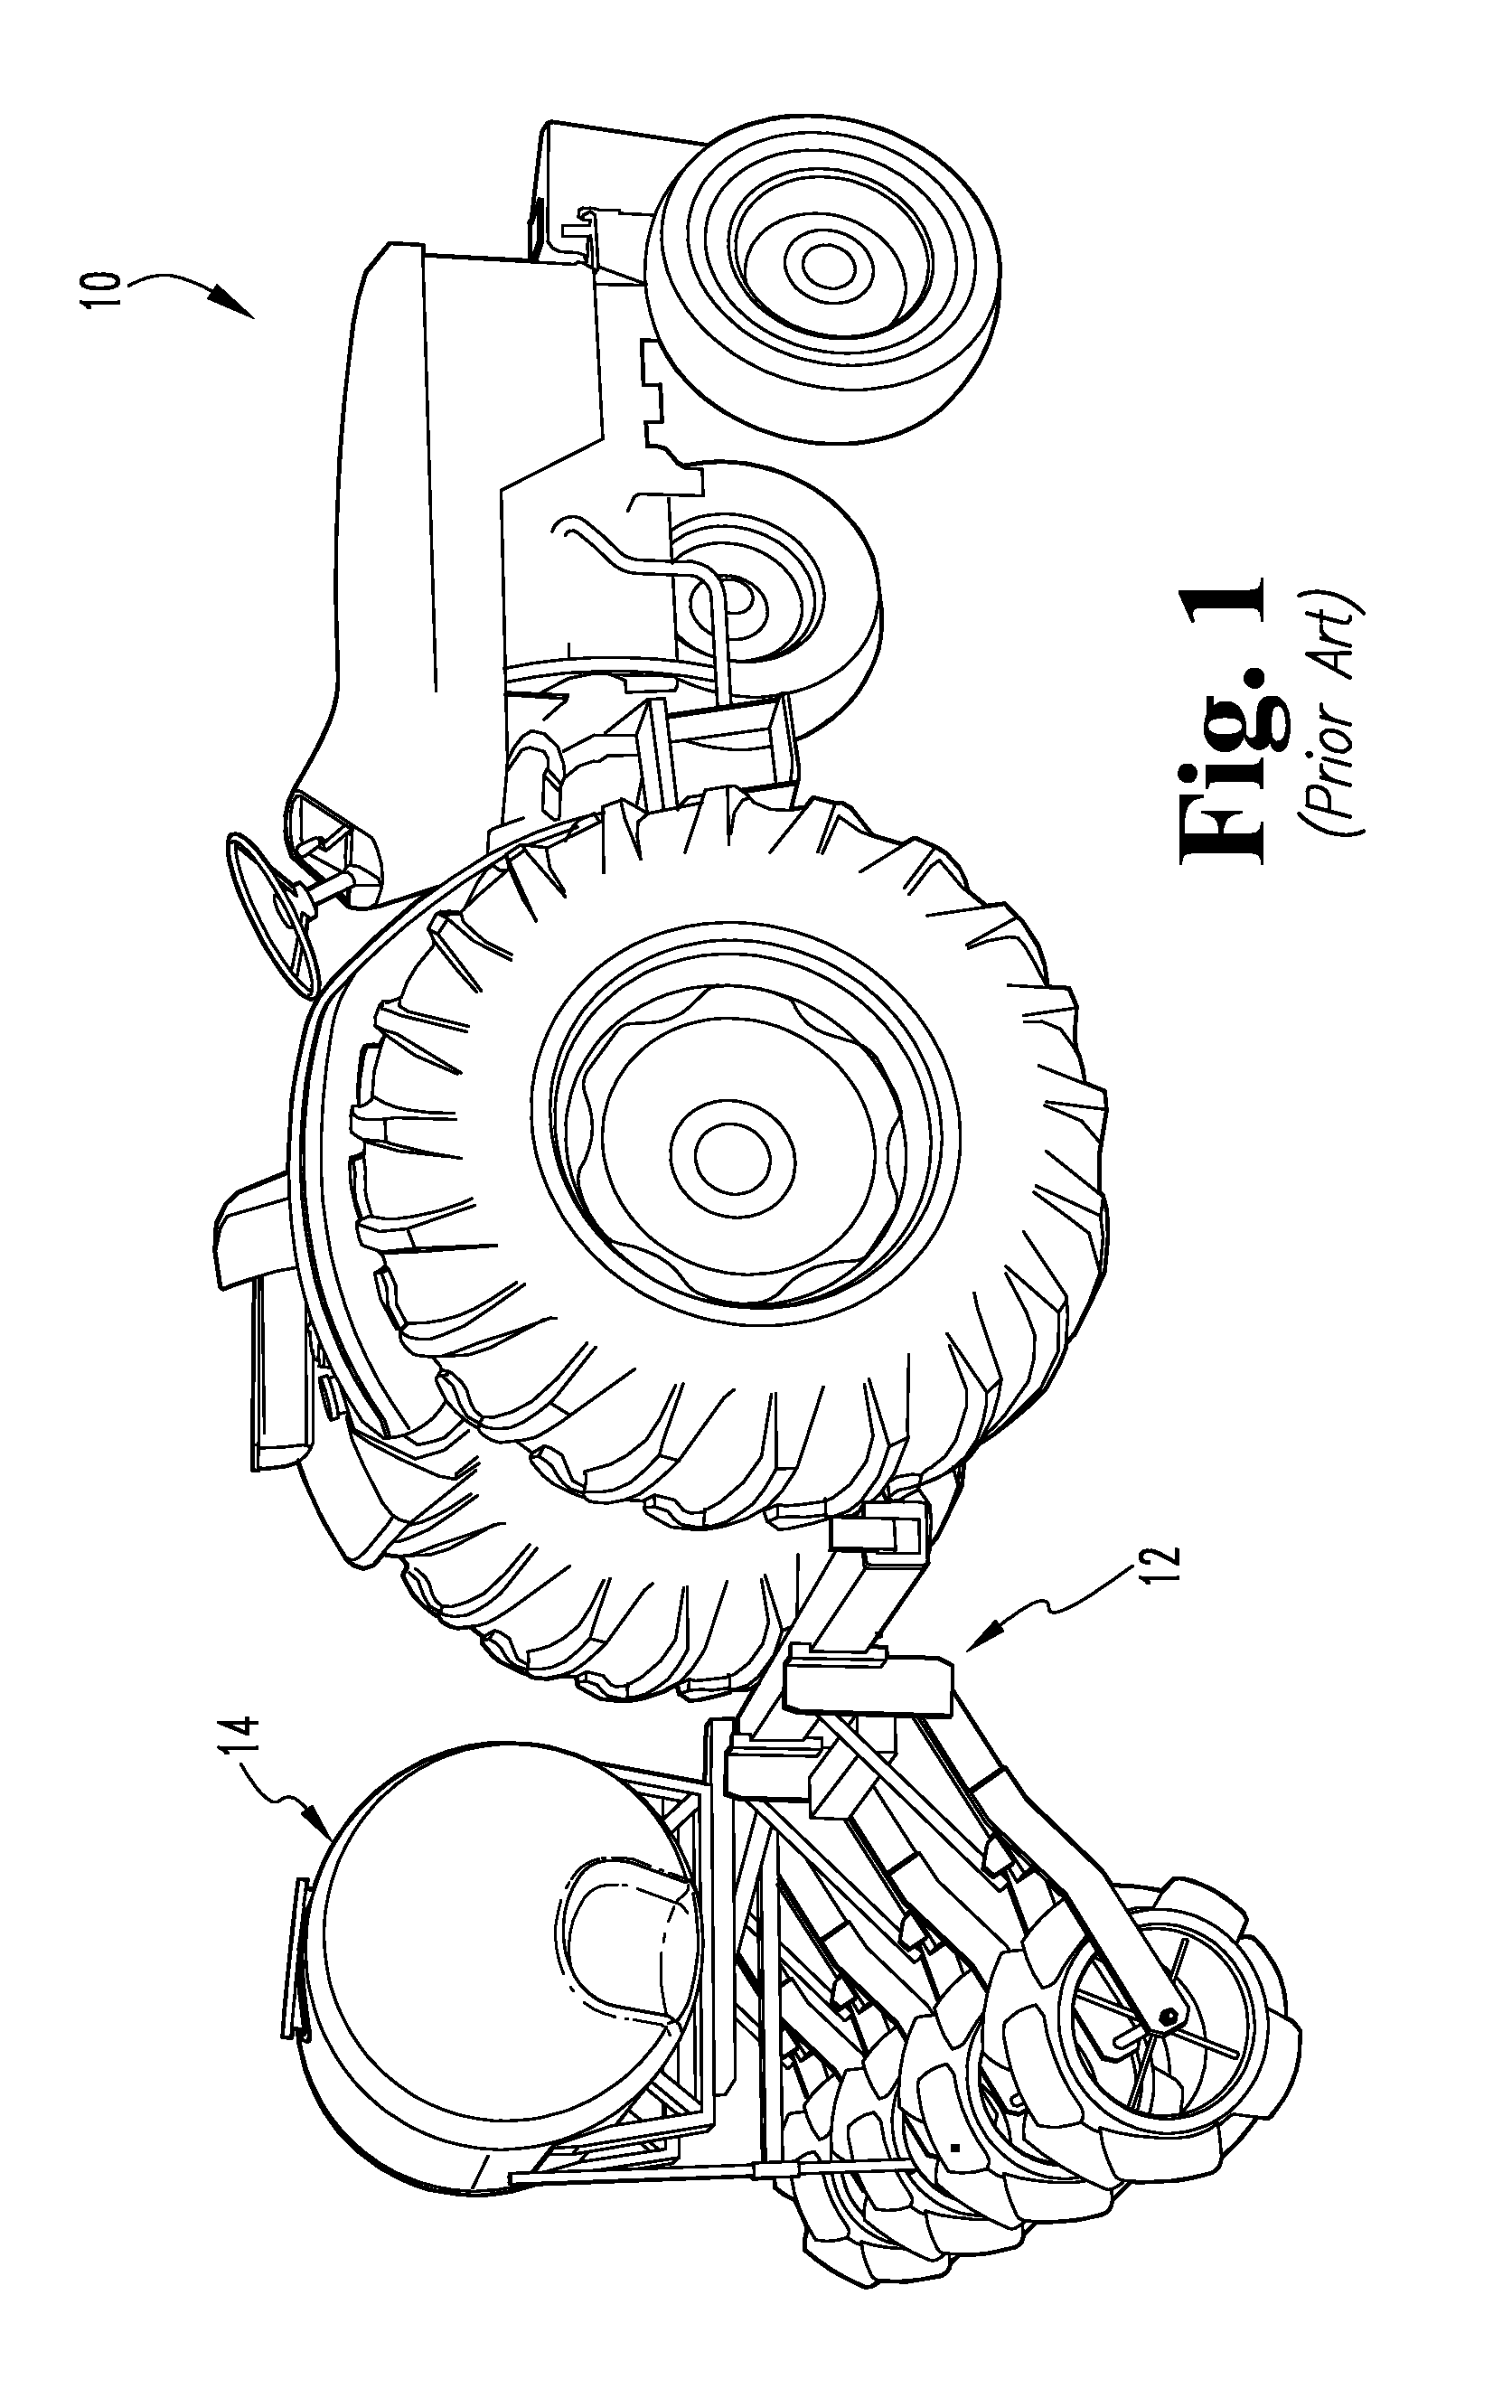 Soil conditioning disc and configurable disc assembly